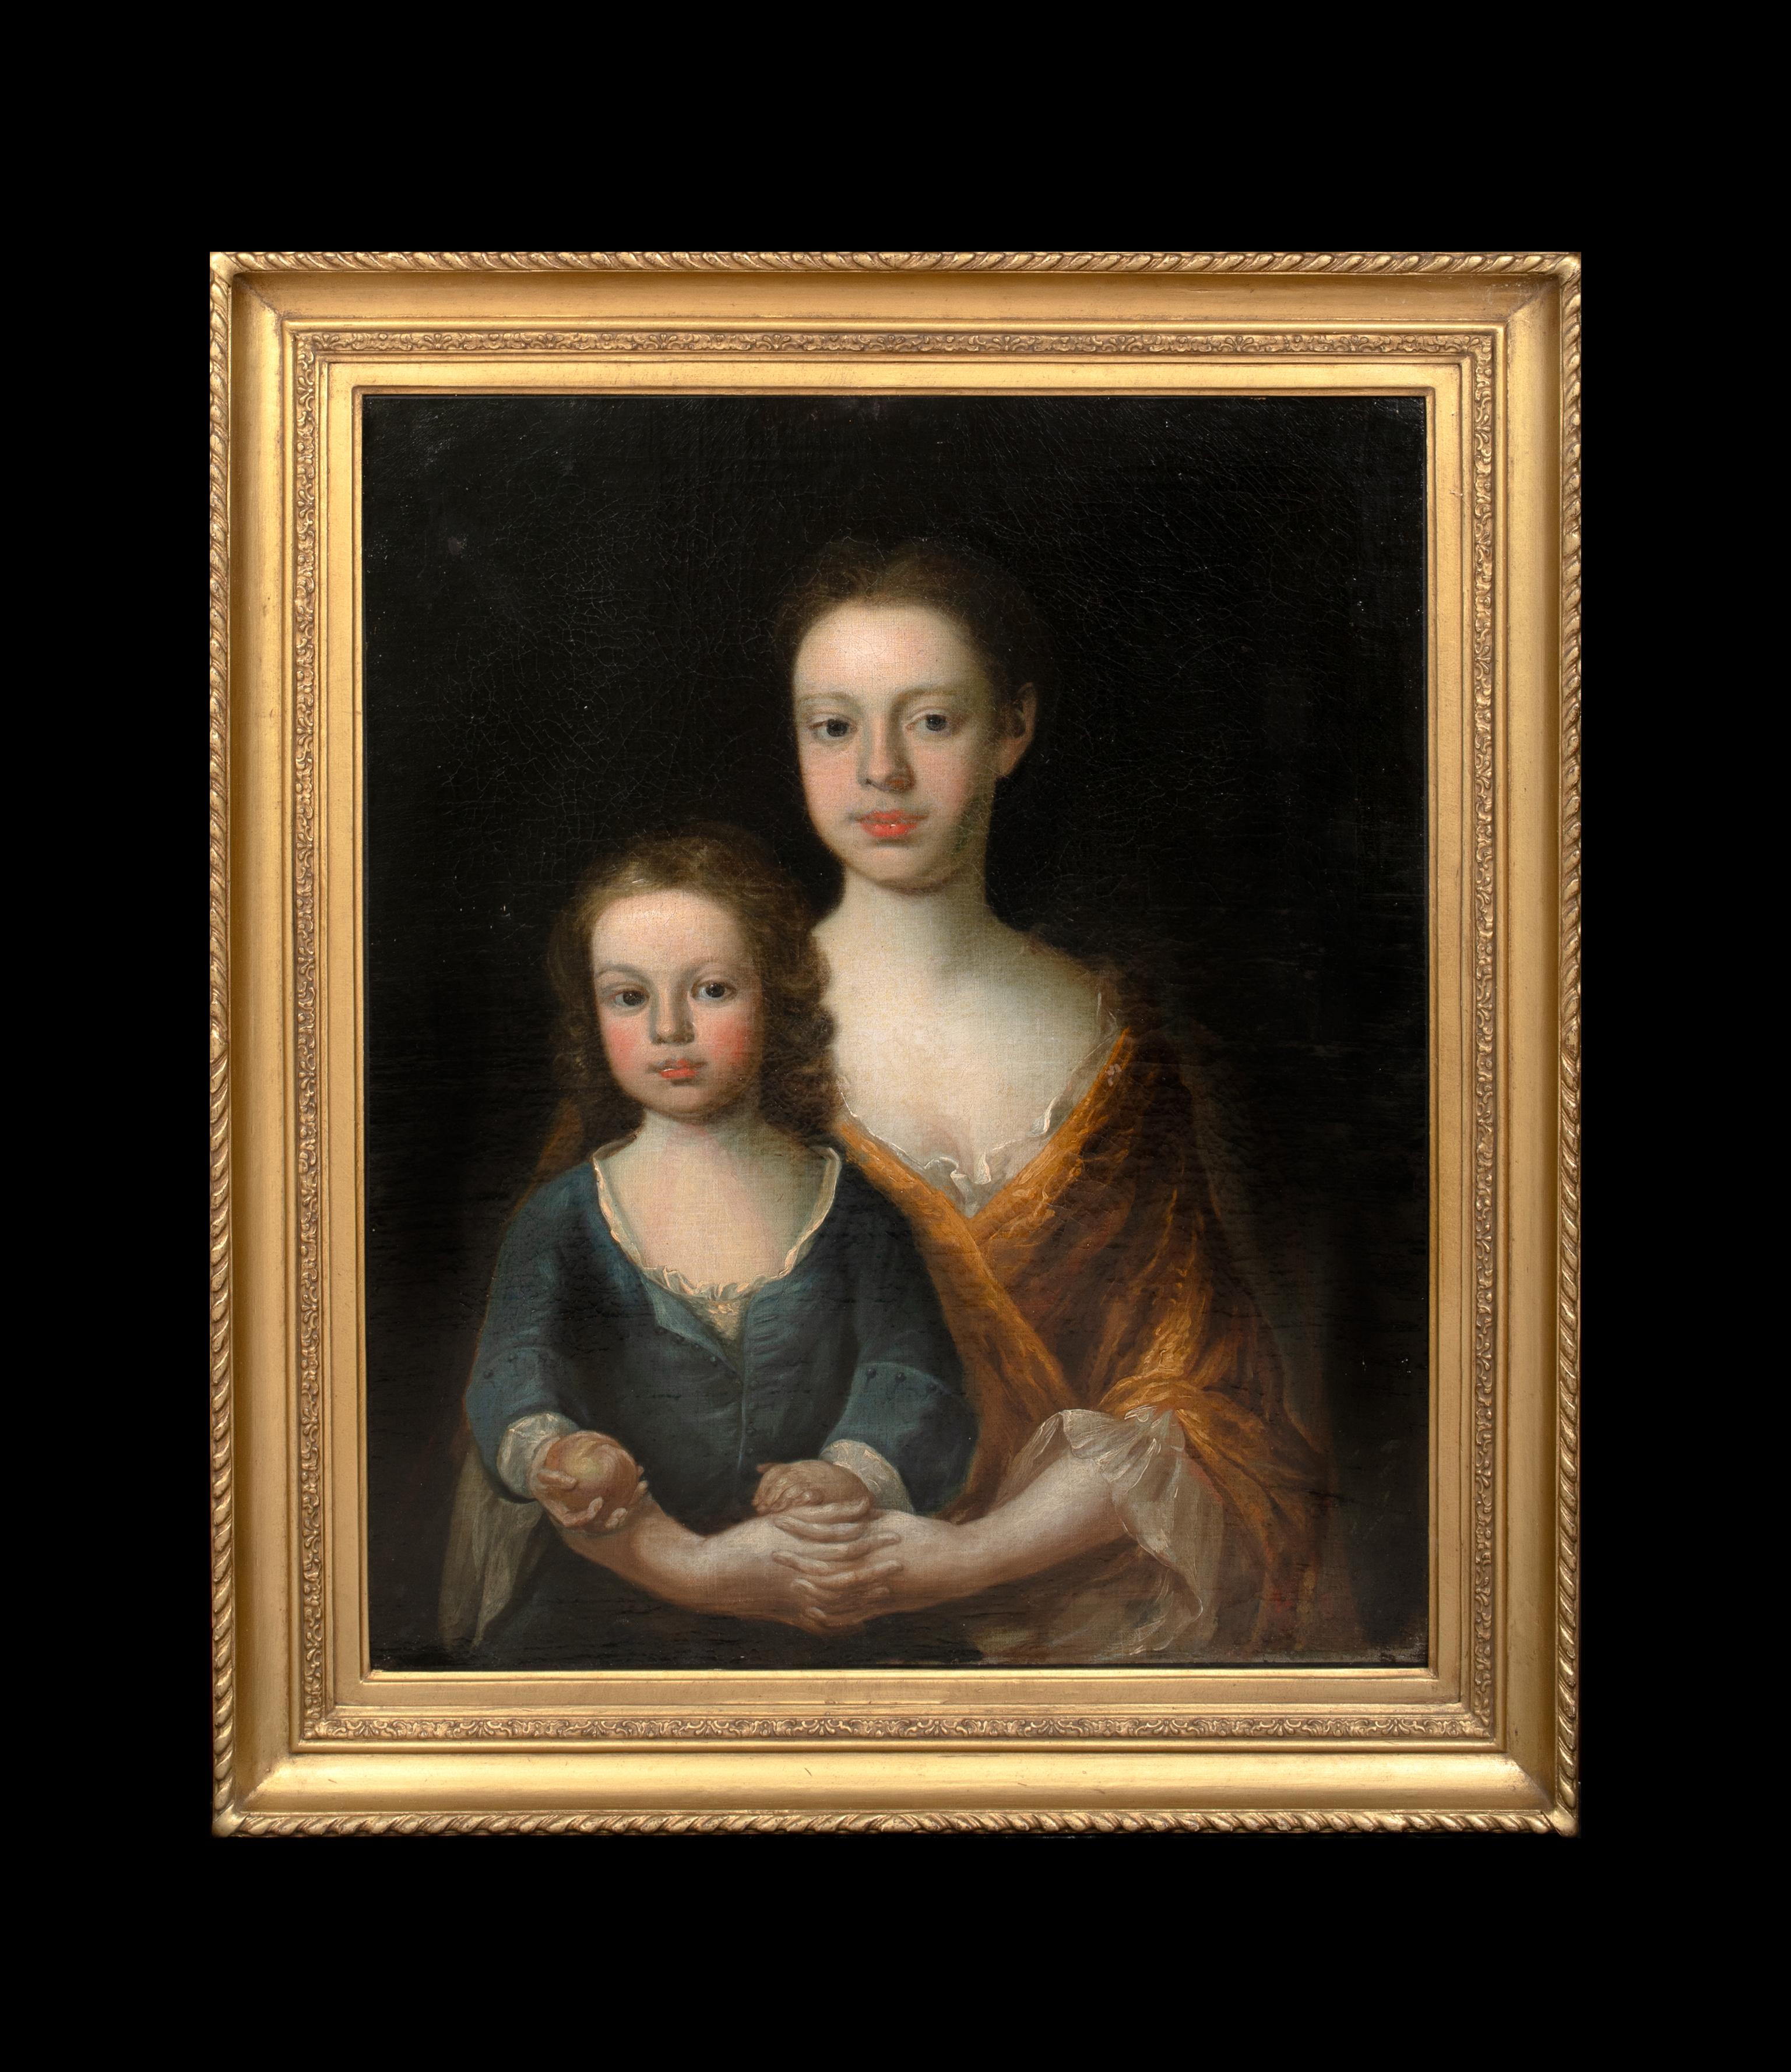 Portrait Of The Russell Sisters, 17th Century Studio of Michael DAHL (1659-1745) - Painting by Michael Dahl